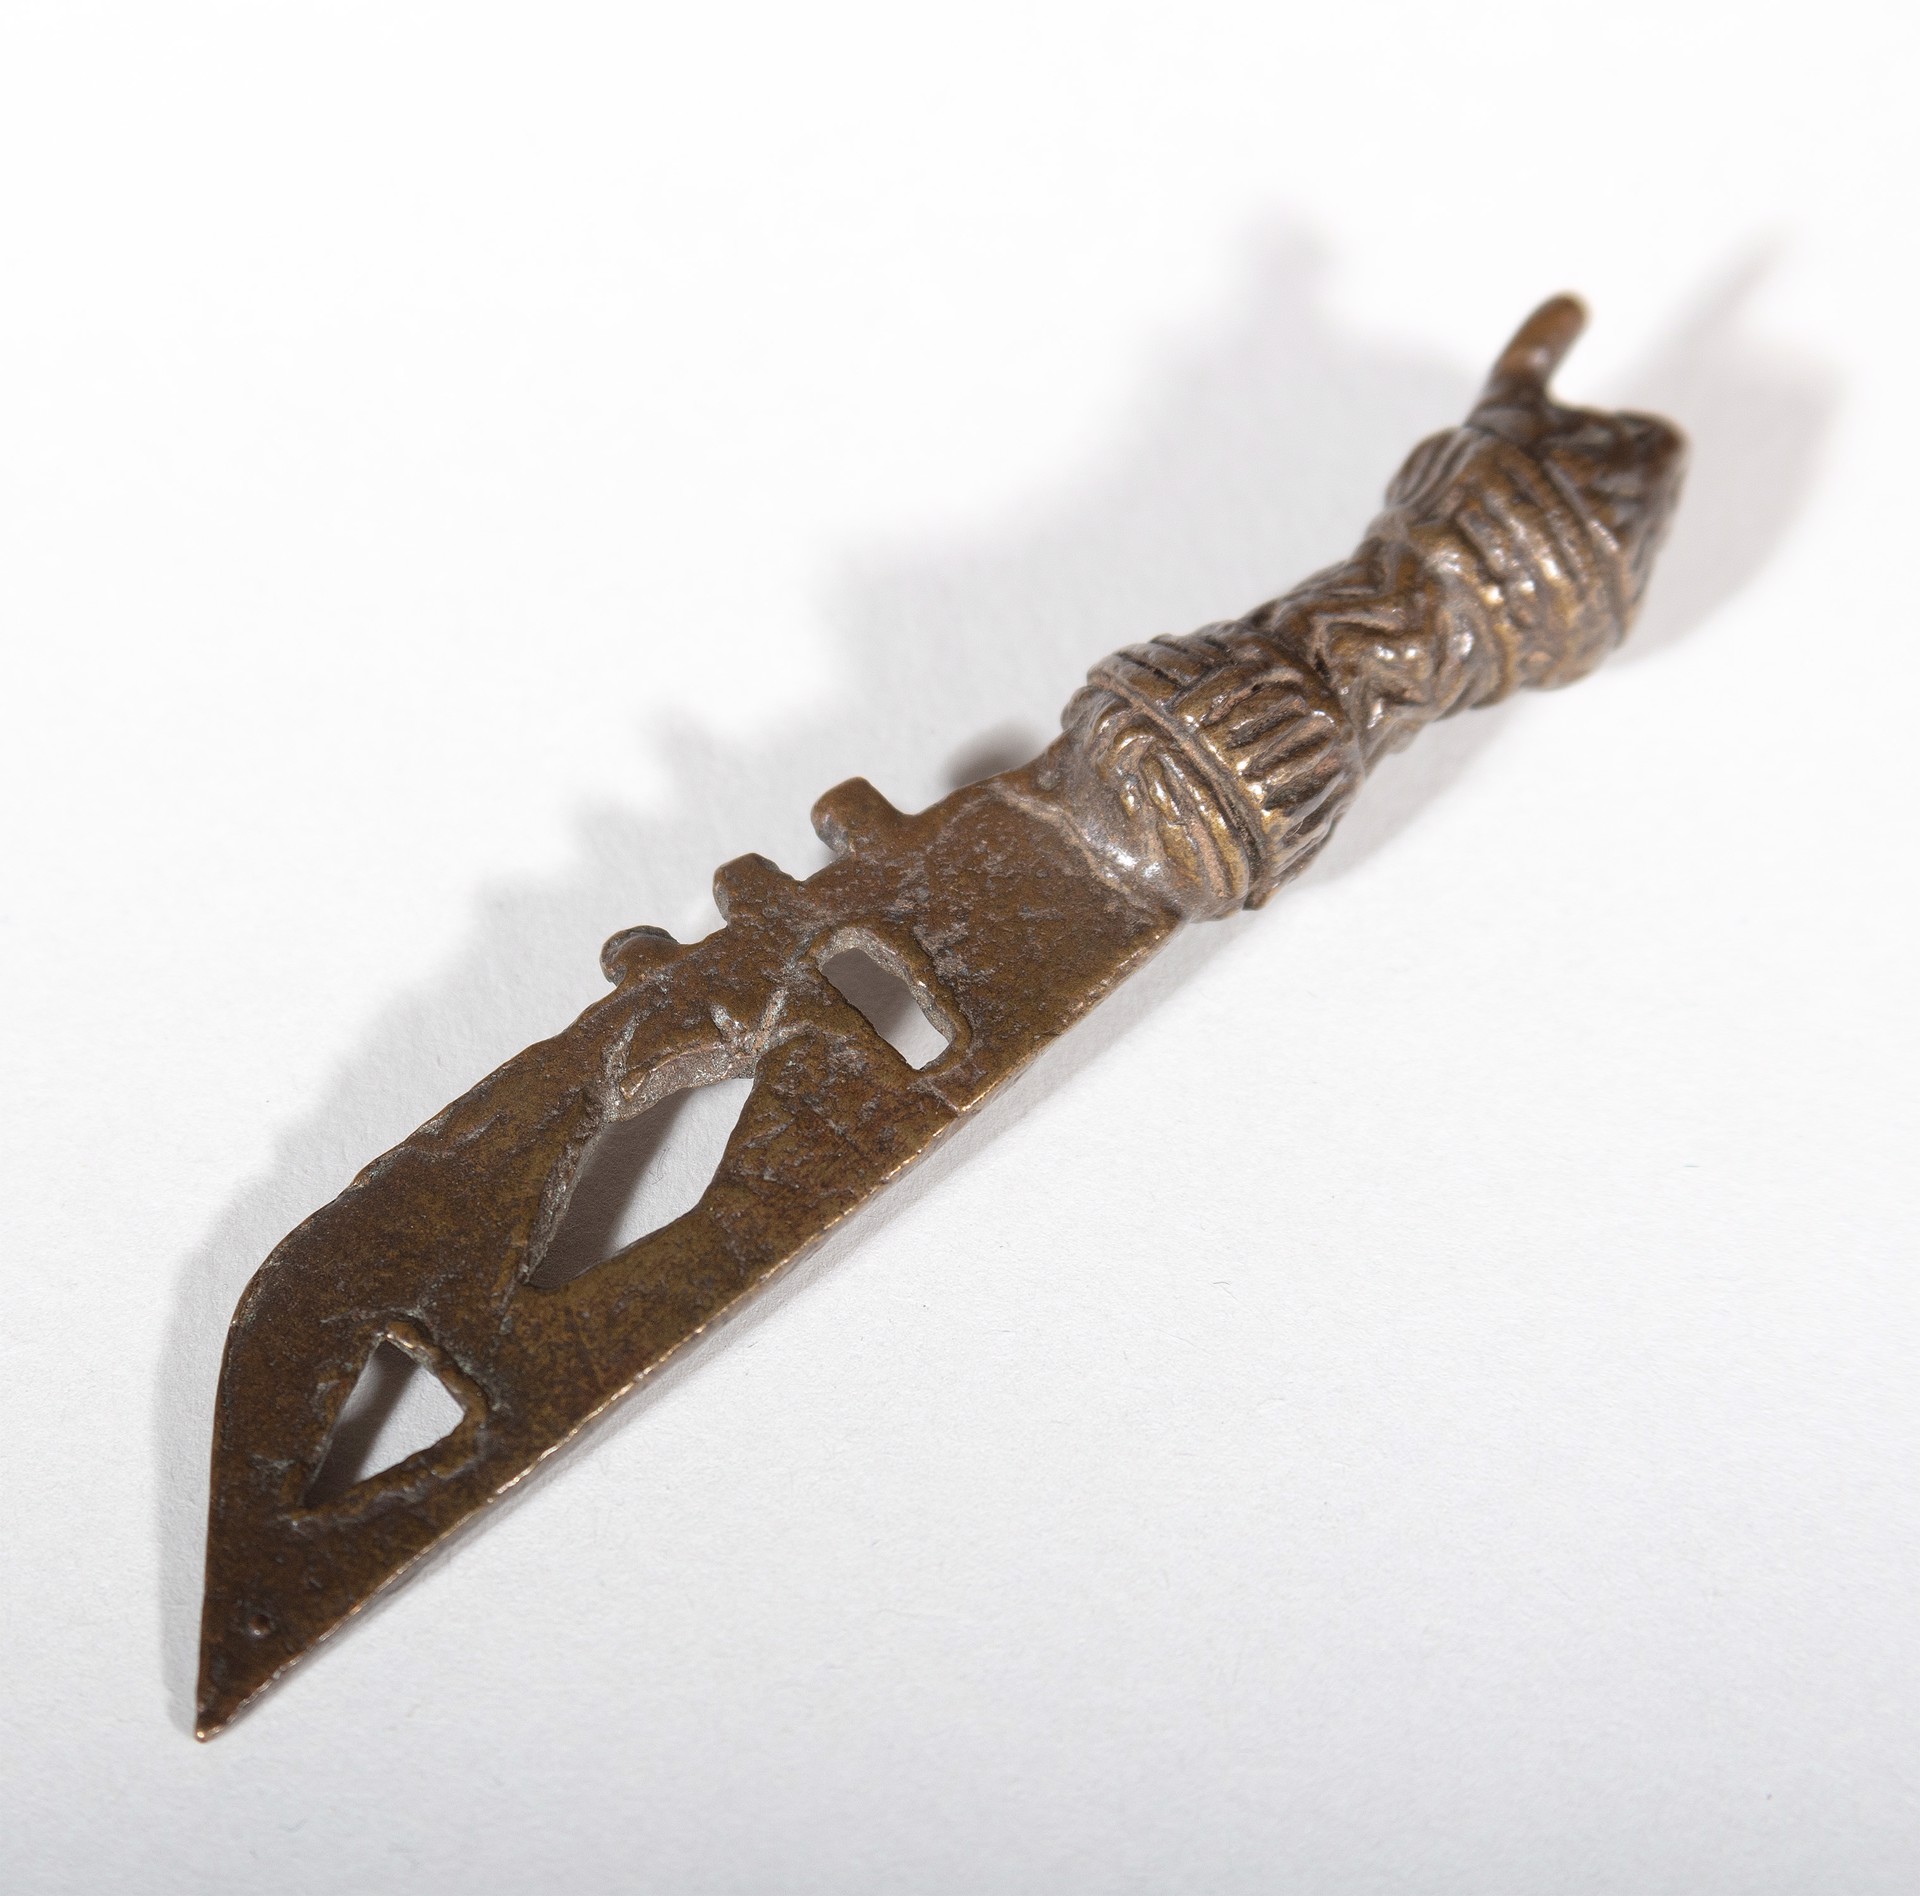 Ashanti Gold Weight - Sword by African